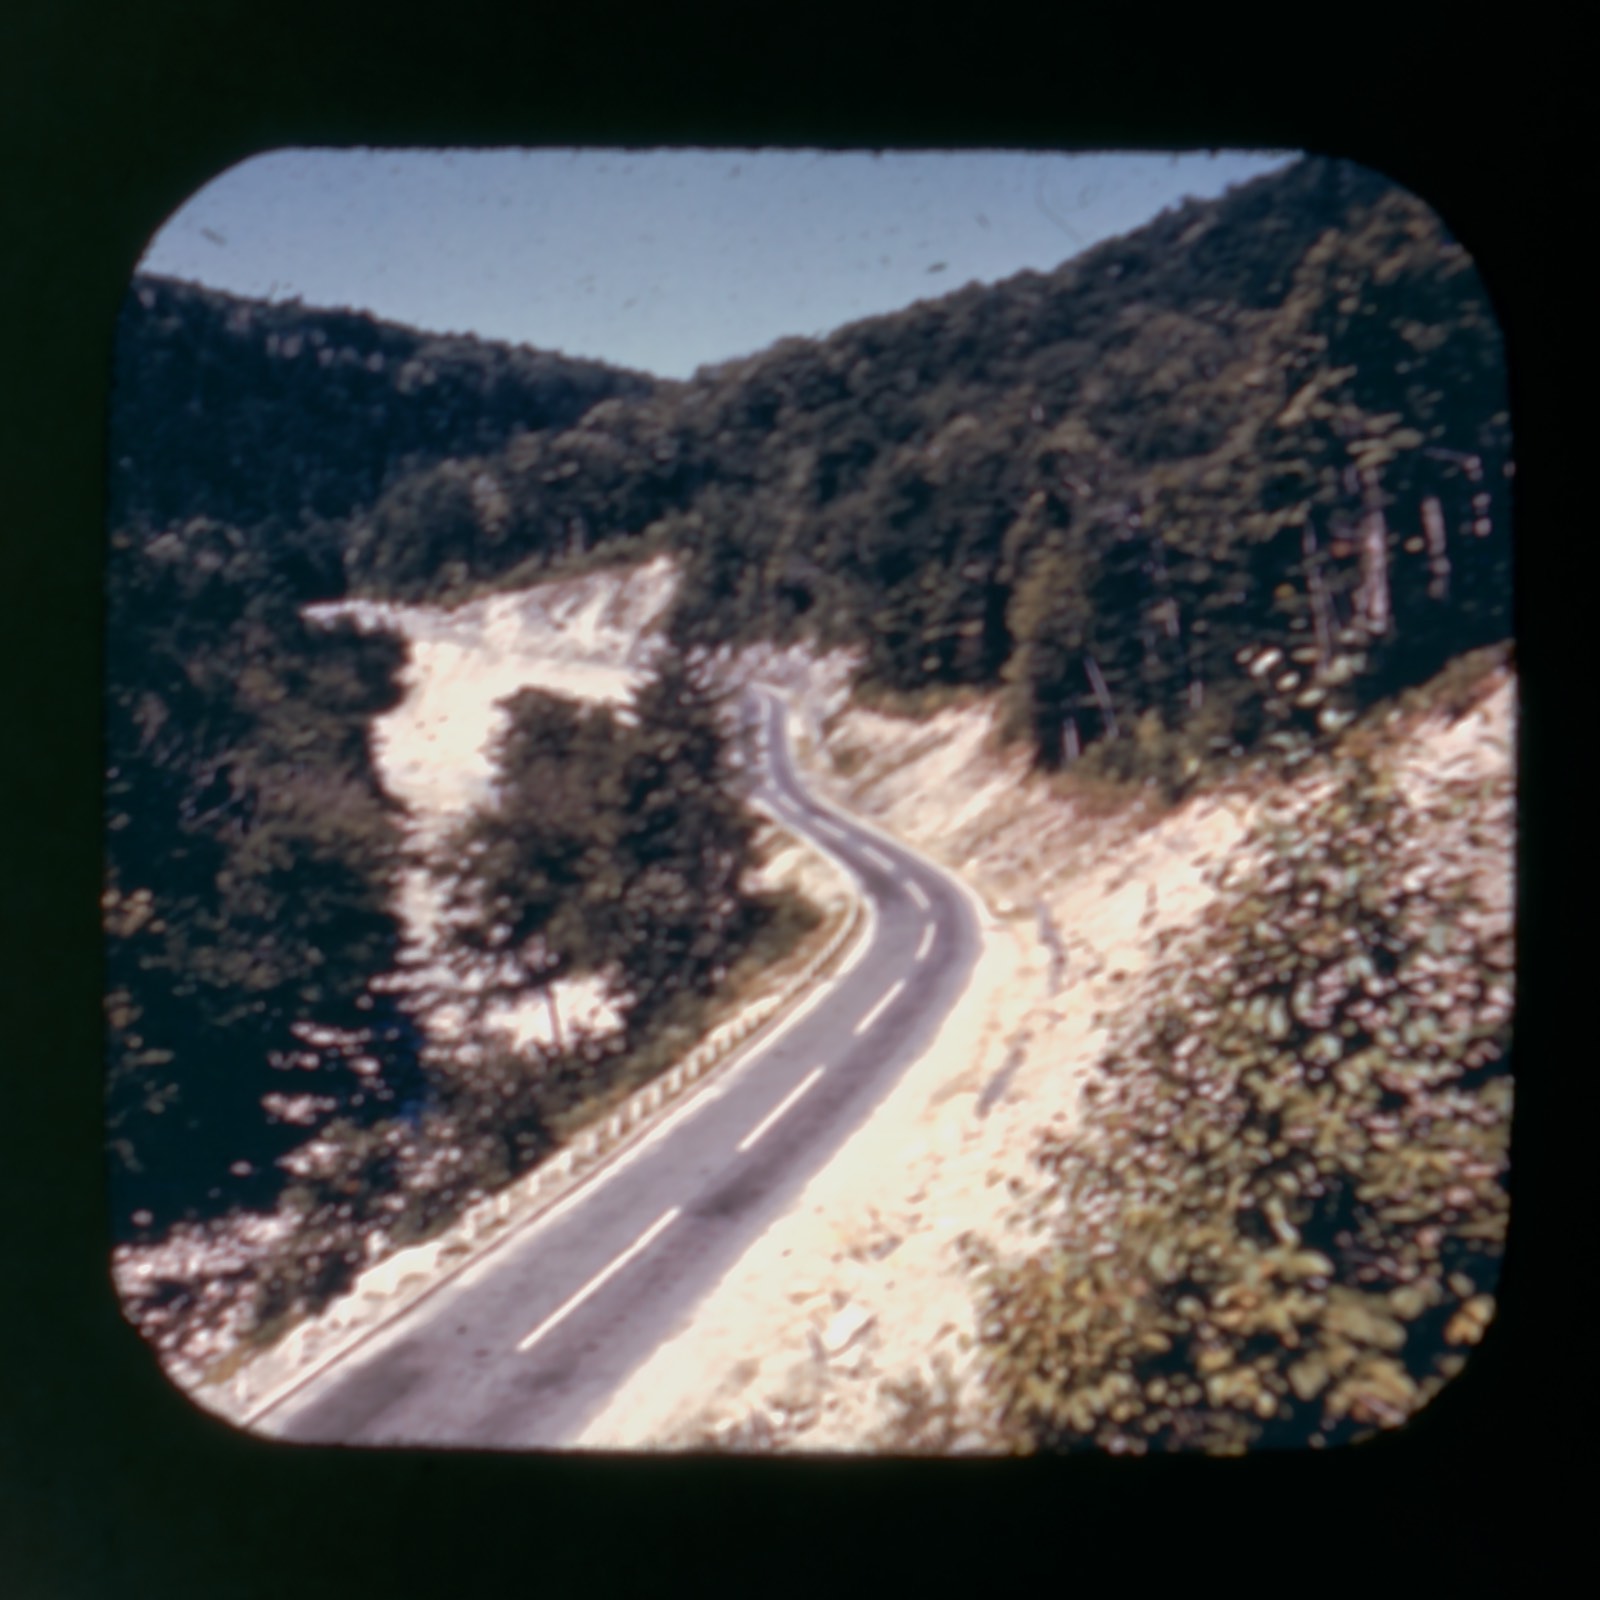 The Mohawk Trail in the Gorge, The Mohawk Trail, View-Master Reel no. 268 